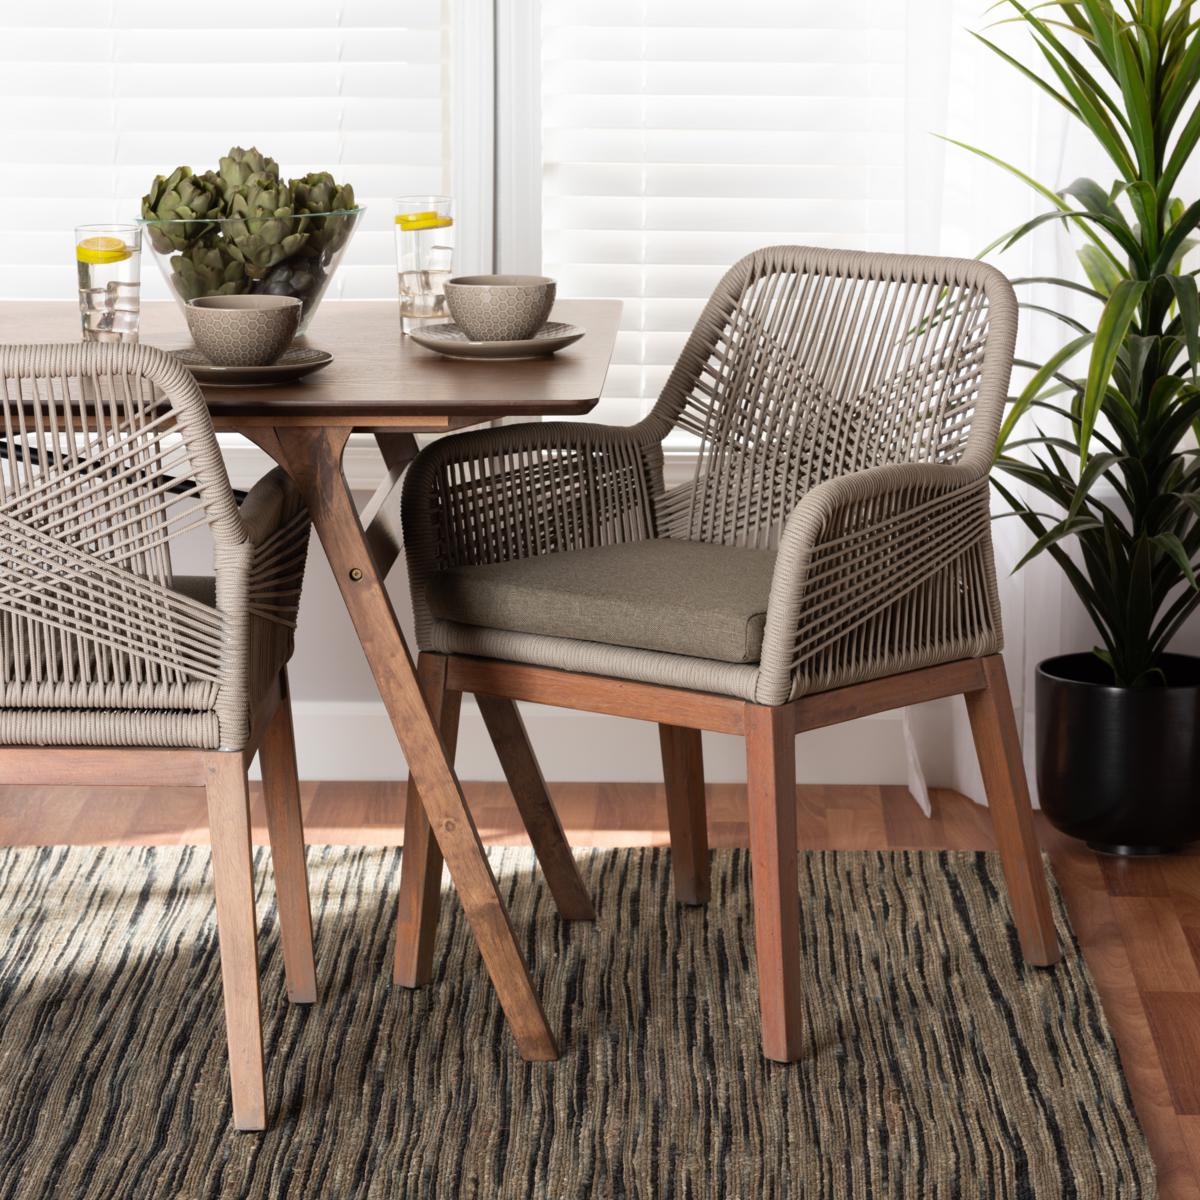 Stylish and comfortable chairs from the brand Baxton